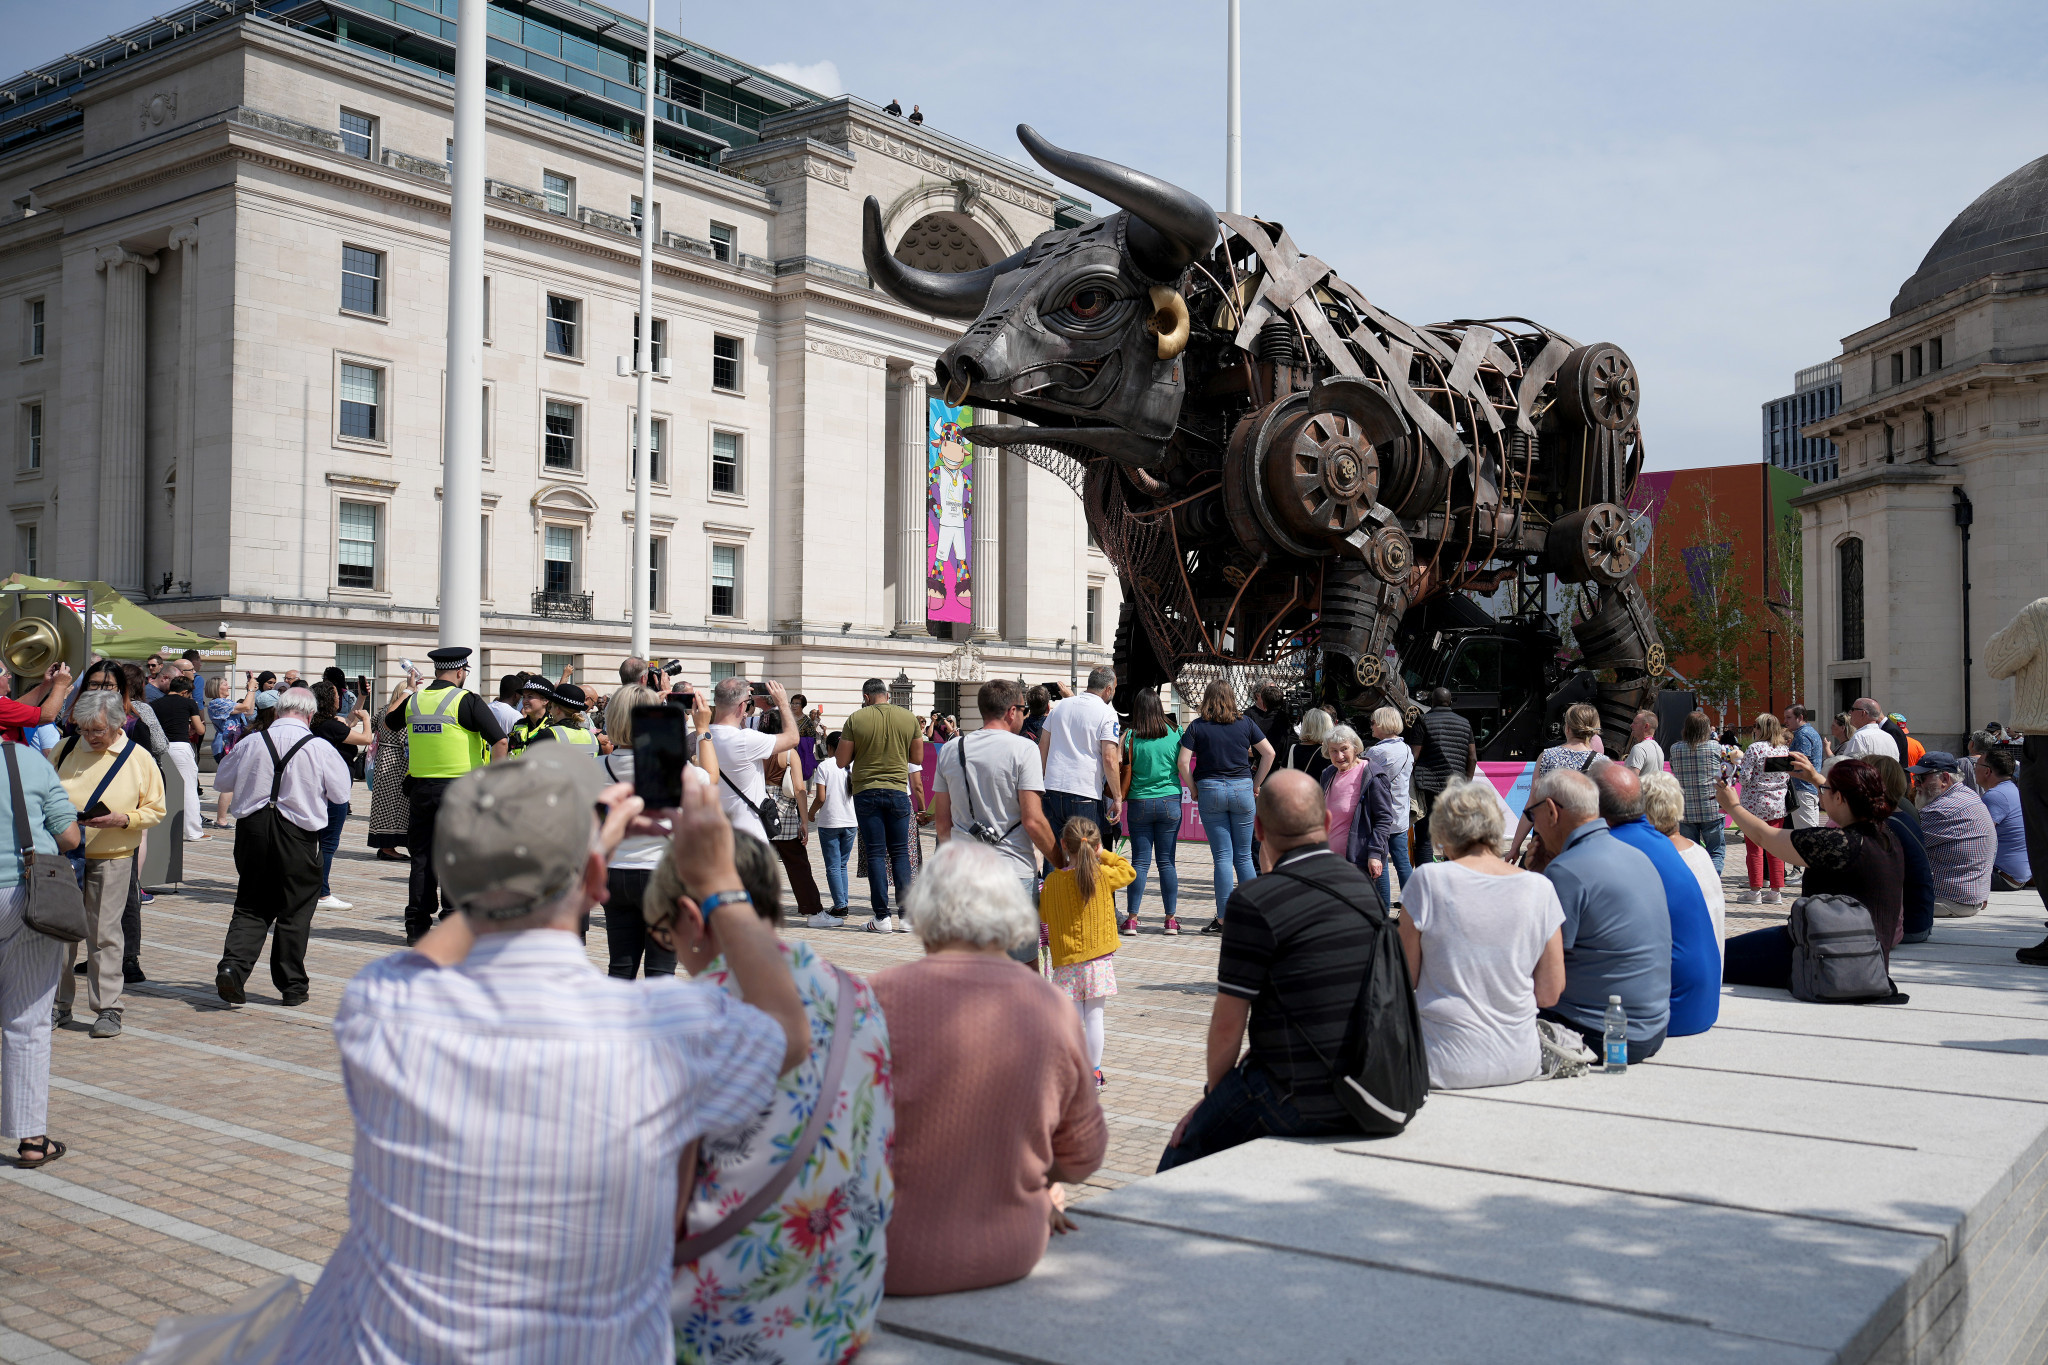 Raging bull set to remain in central Birmingham until end of September